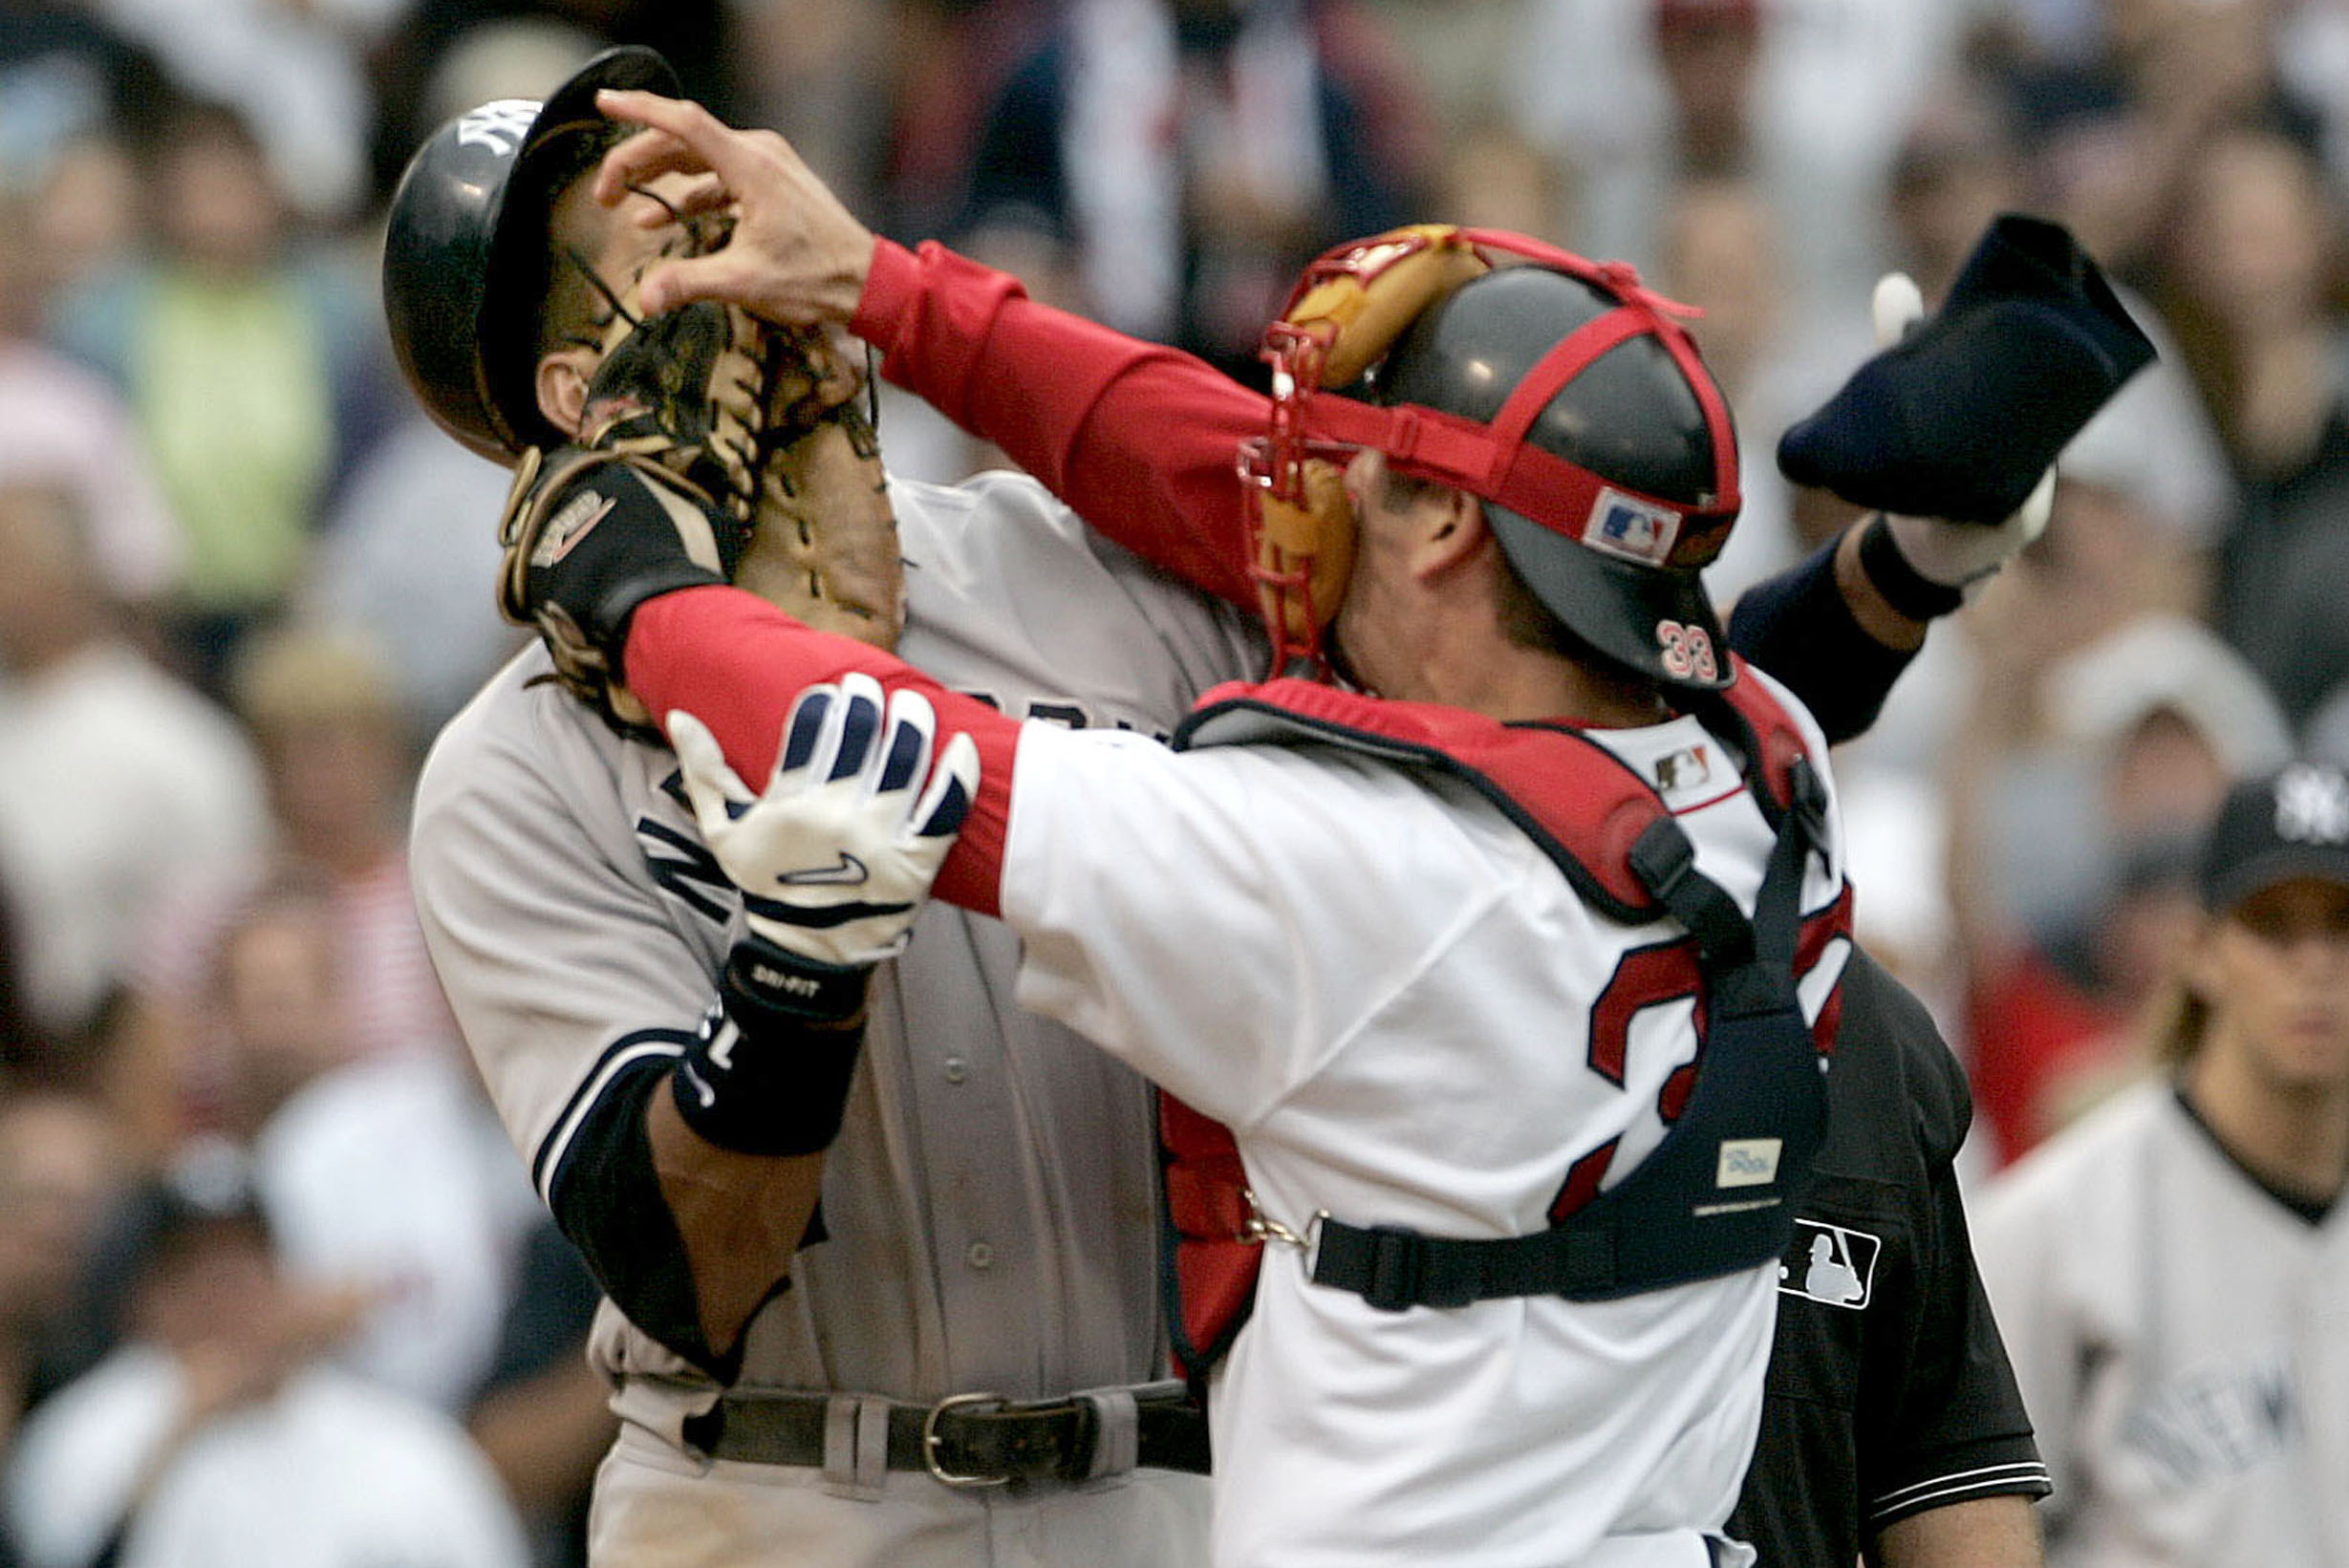 Uh-Oh. The Yankees and Red Sox Hate Each Other Again - WSJ